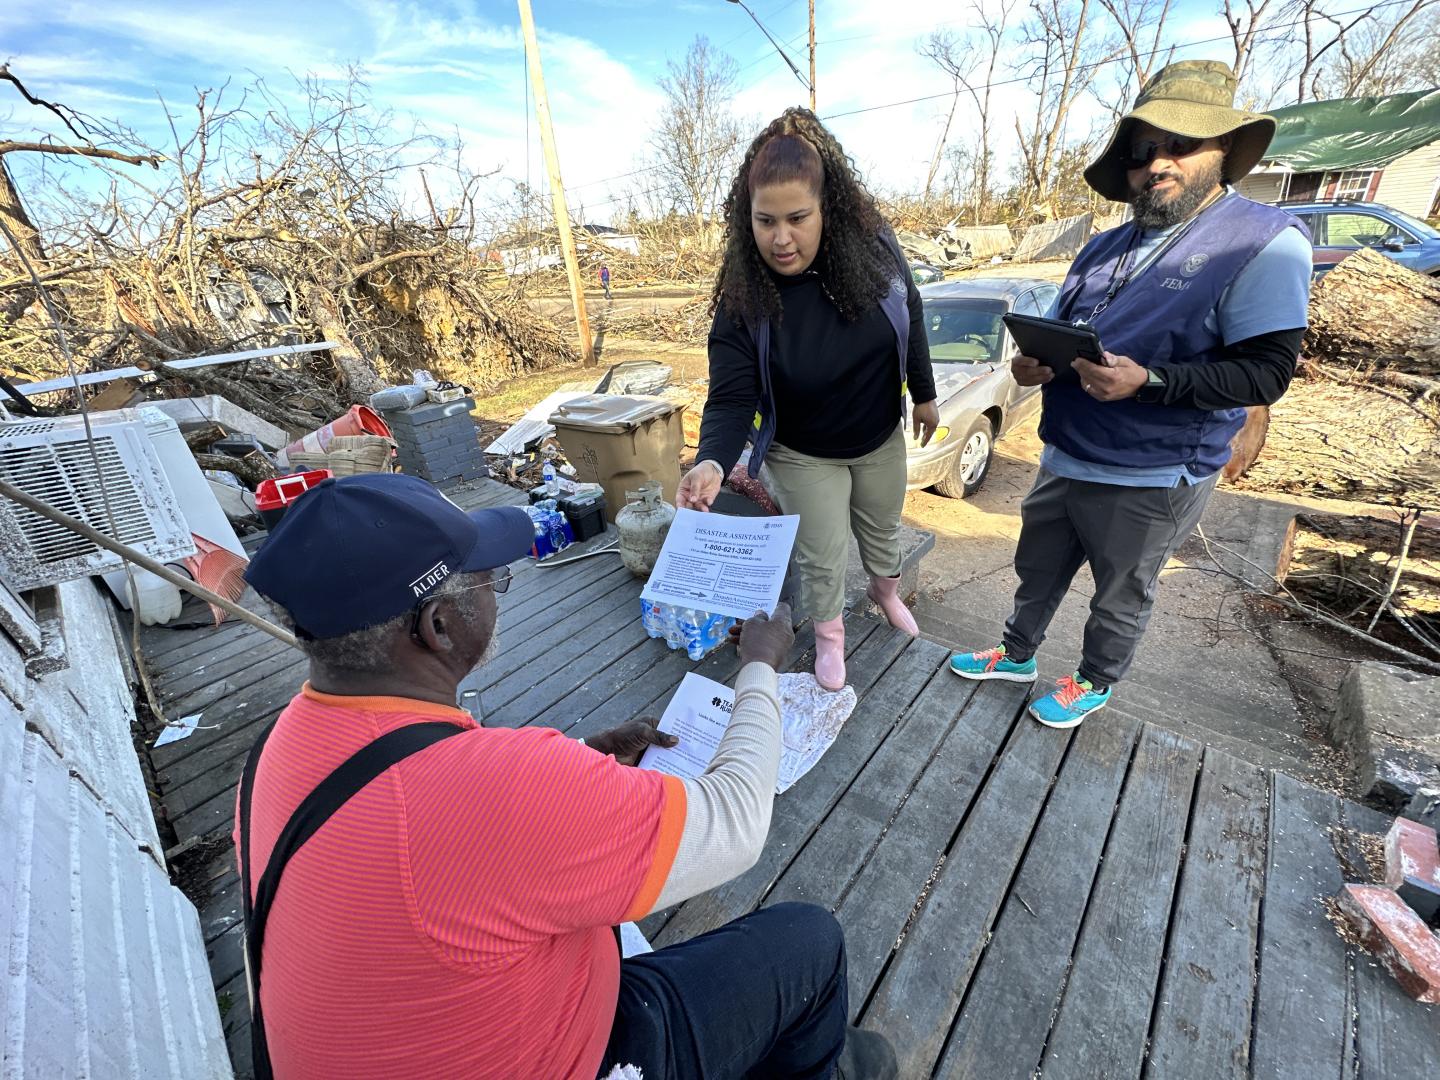 Two FEMA employees hand a form to a man sitting on his porch.